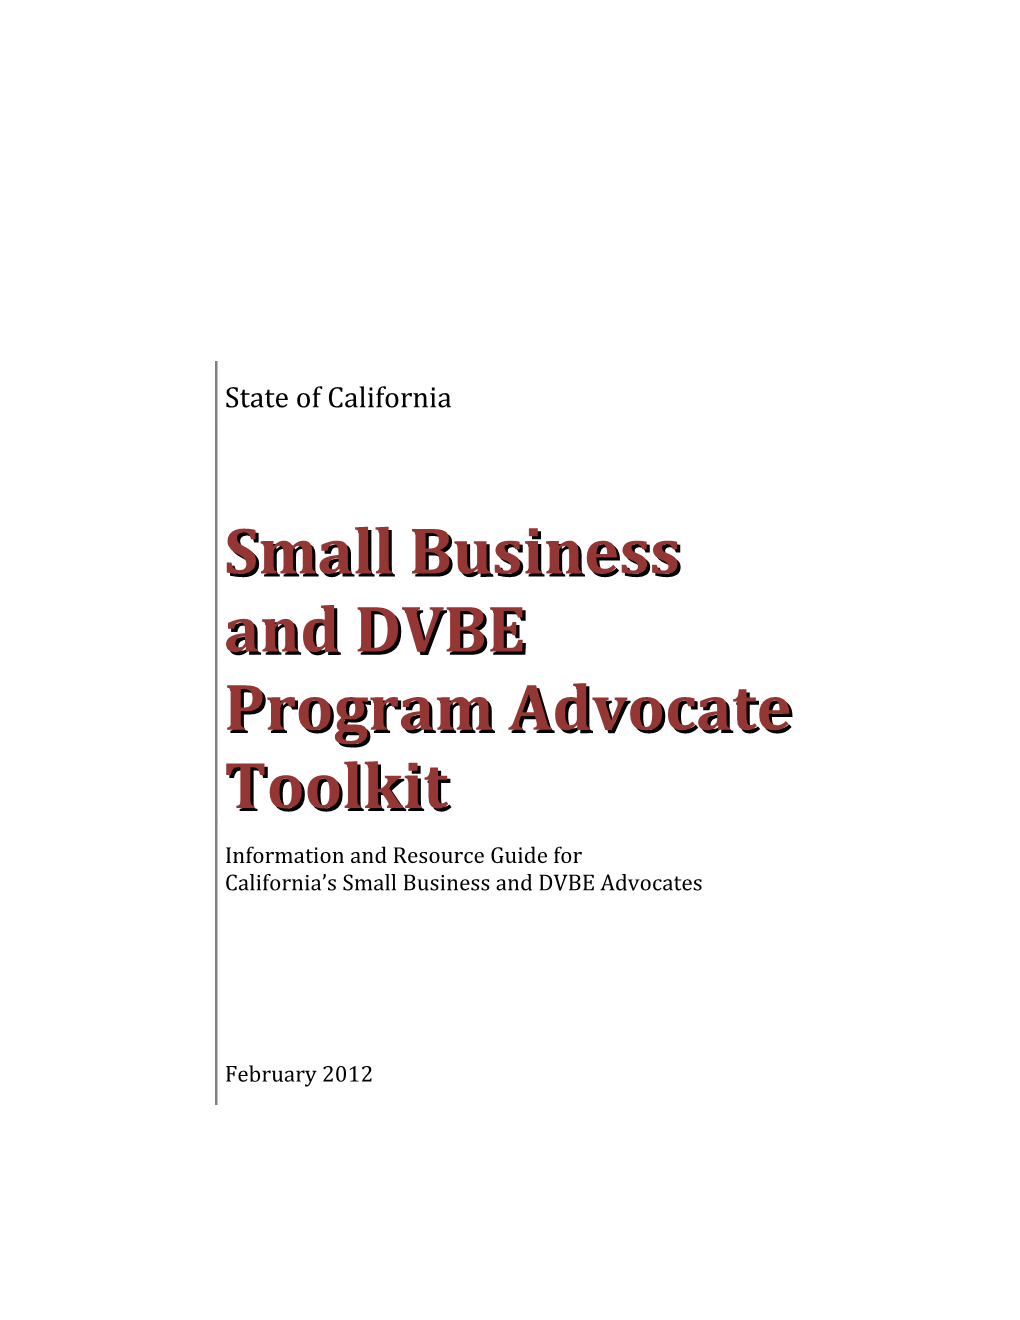 Small Business and DVBE Program Advocate Toolkit